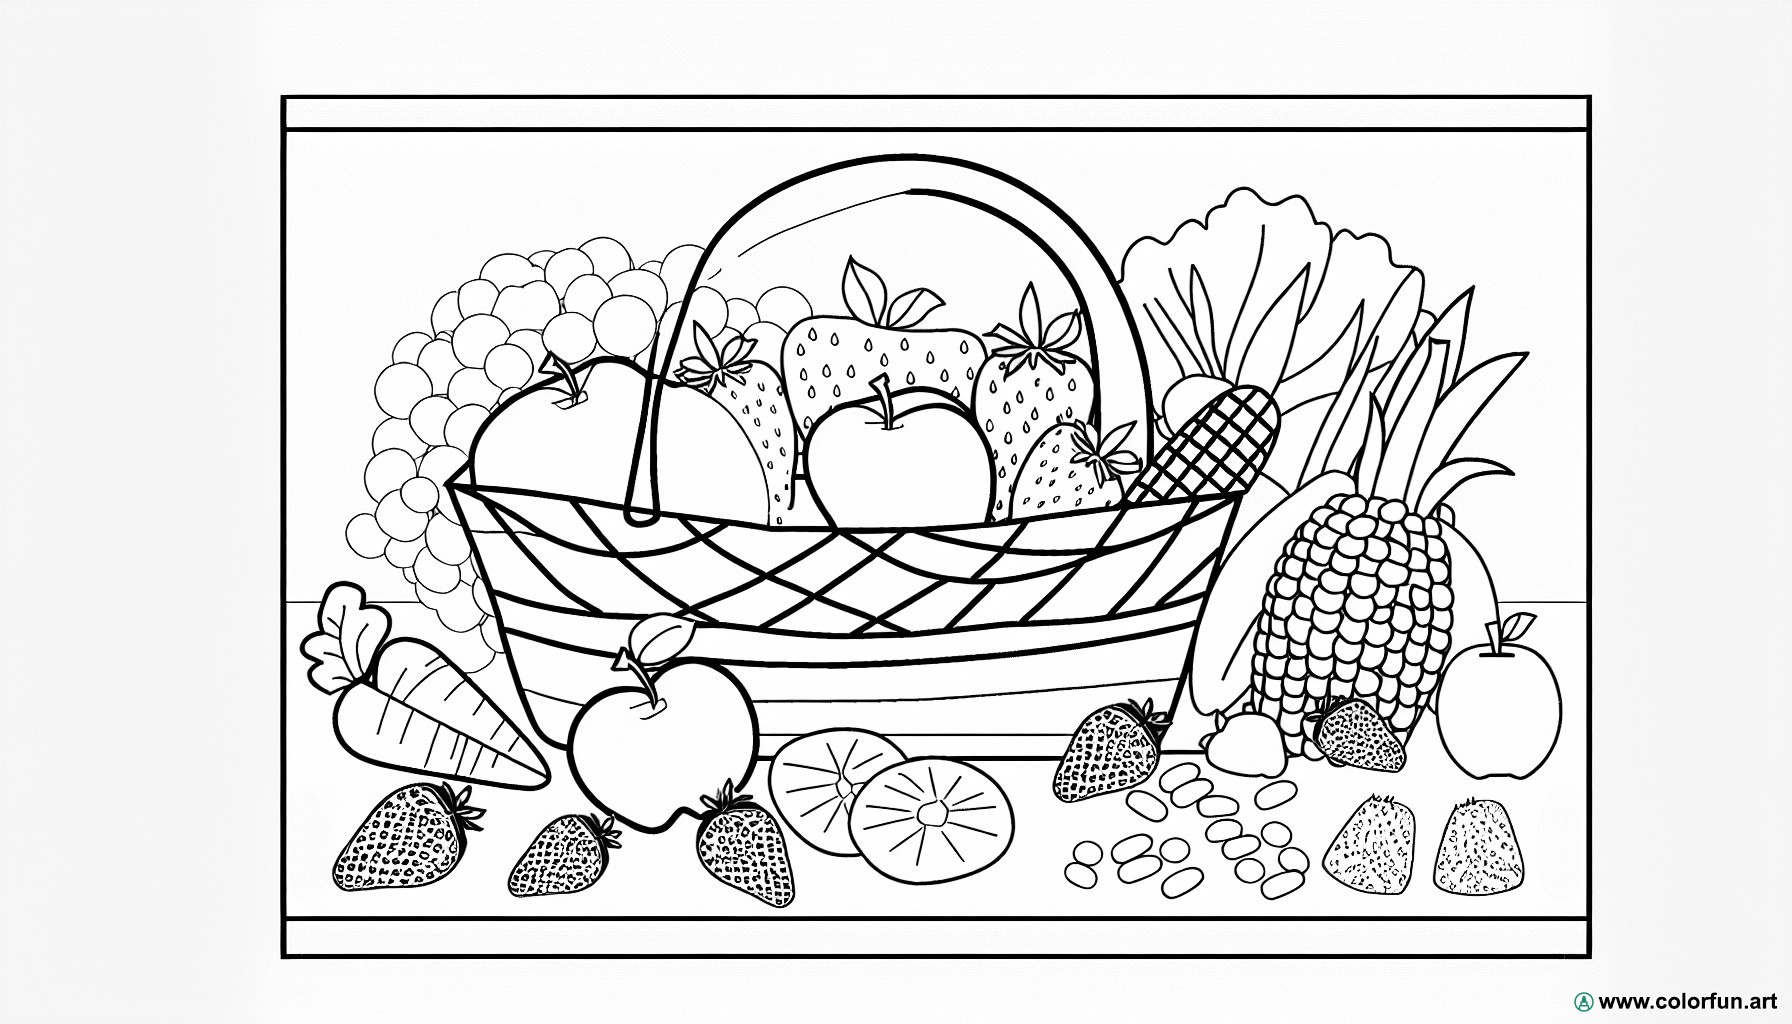 Summer fruits and vegetables coloring page